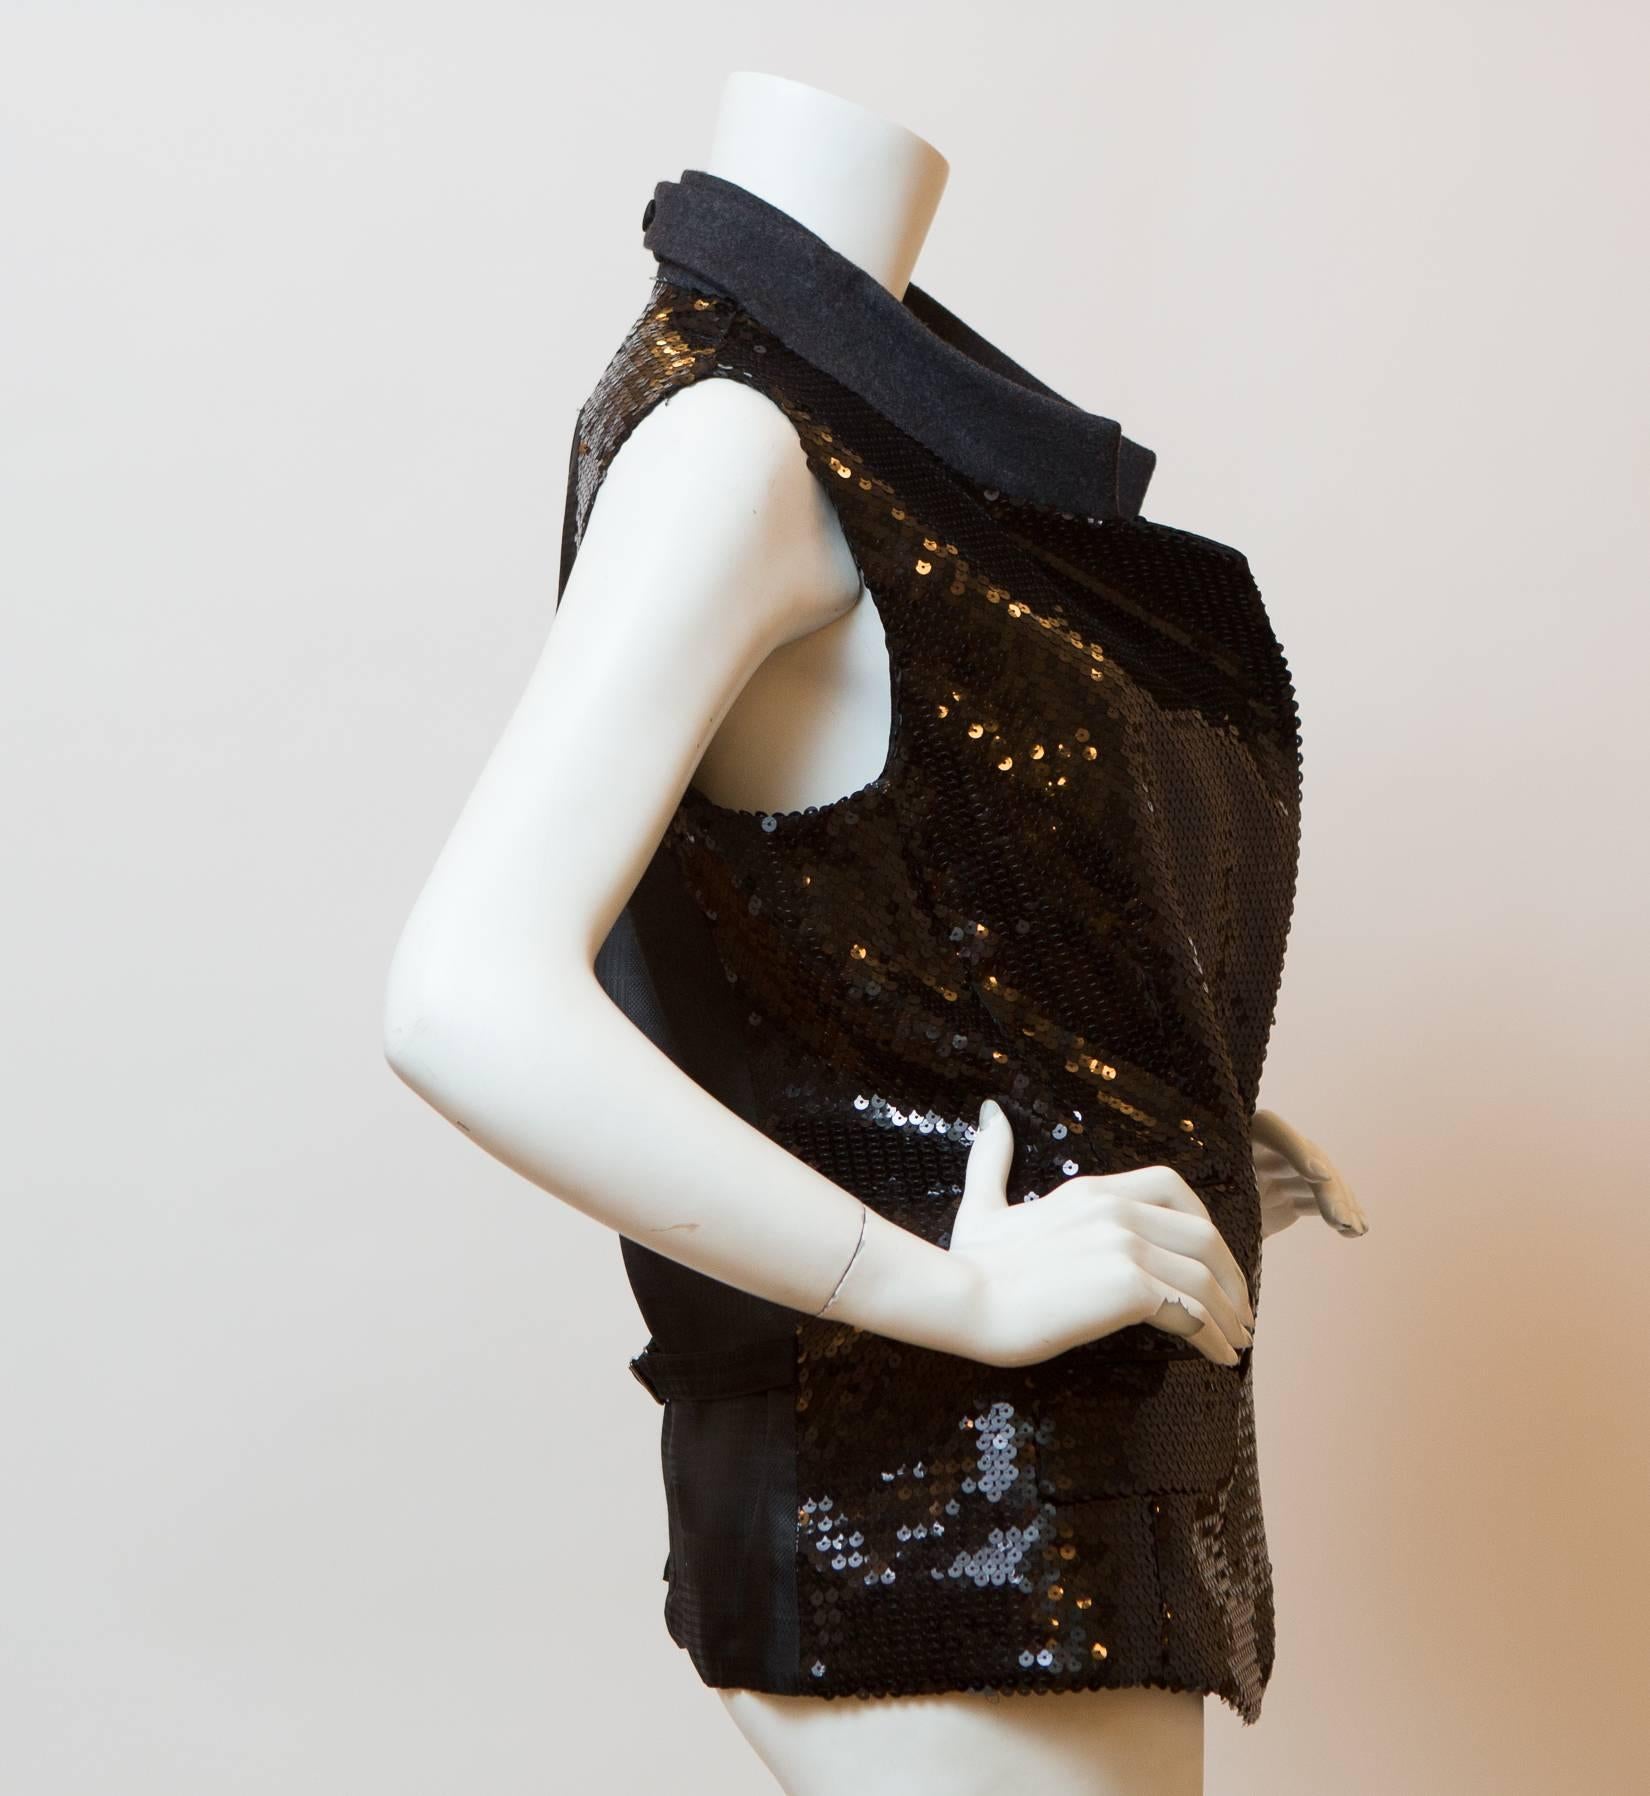 Dolce & Gabbana black sequin tuxedo vest. 
New with Tags.